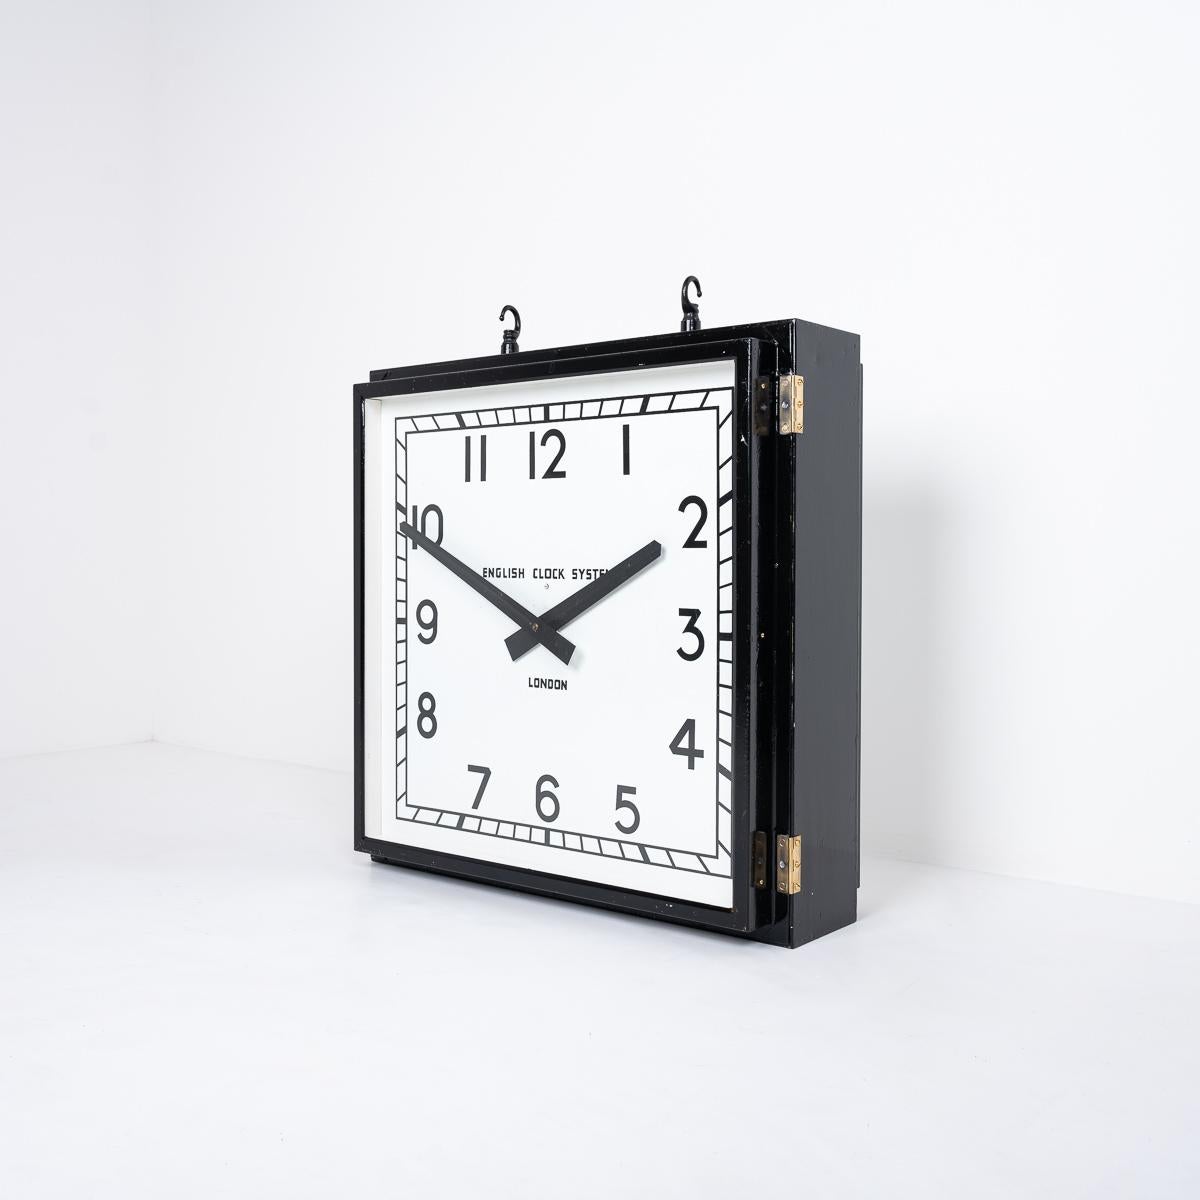 Huge Reclaimed Industrial Double Sided Factory Clock
An original vintage double-sided factory clock hanging clock.

Crafted by English Clock System, London, England, circa 1950.

The clock has been professionally restored.

Everything remains